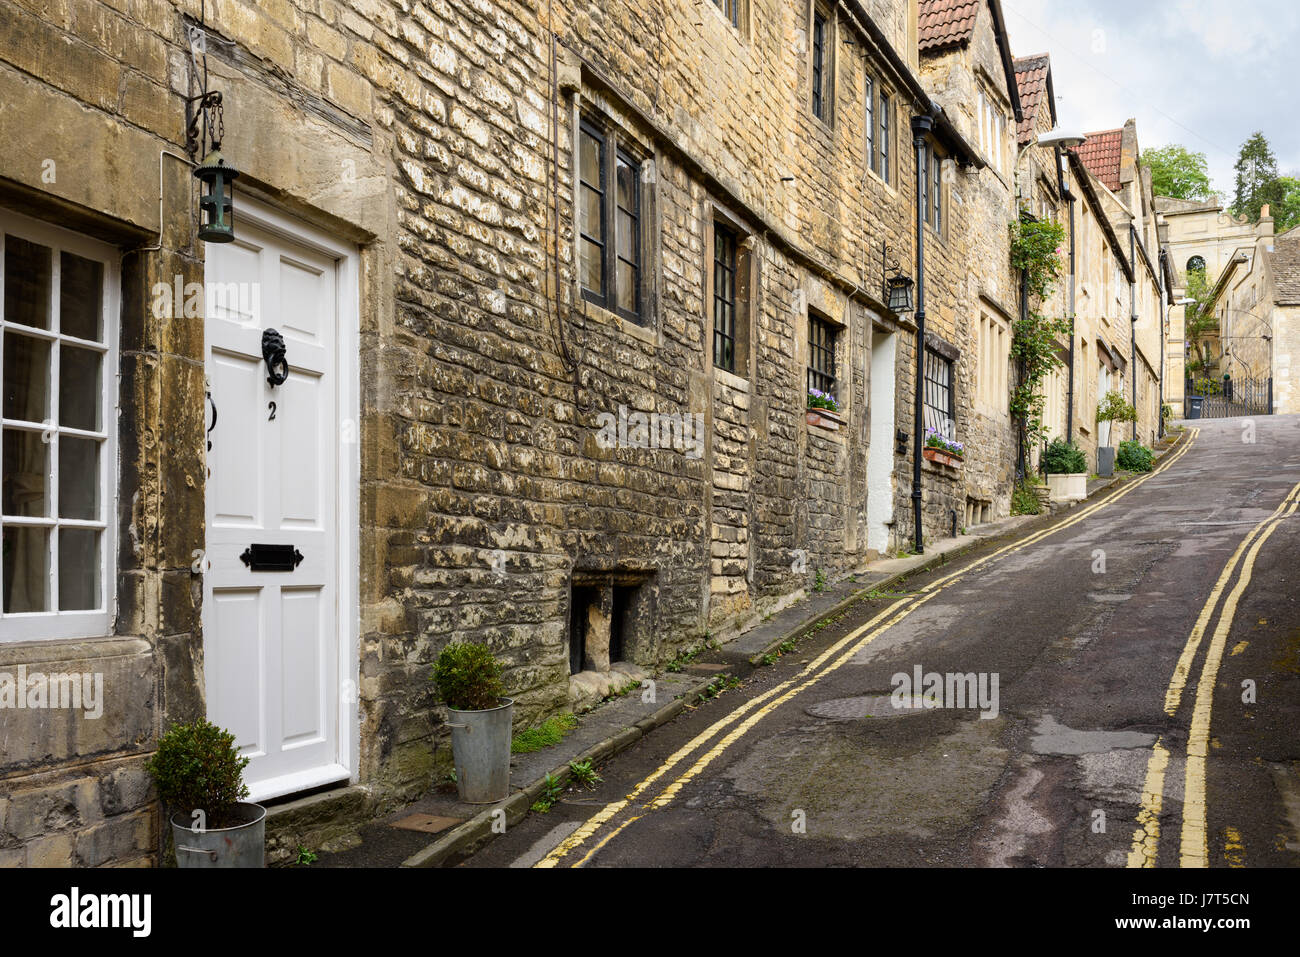 Cottages on Coppice Hill in the historic town of Bradford on Avon, Wiltshire, England. Stock Photo